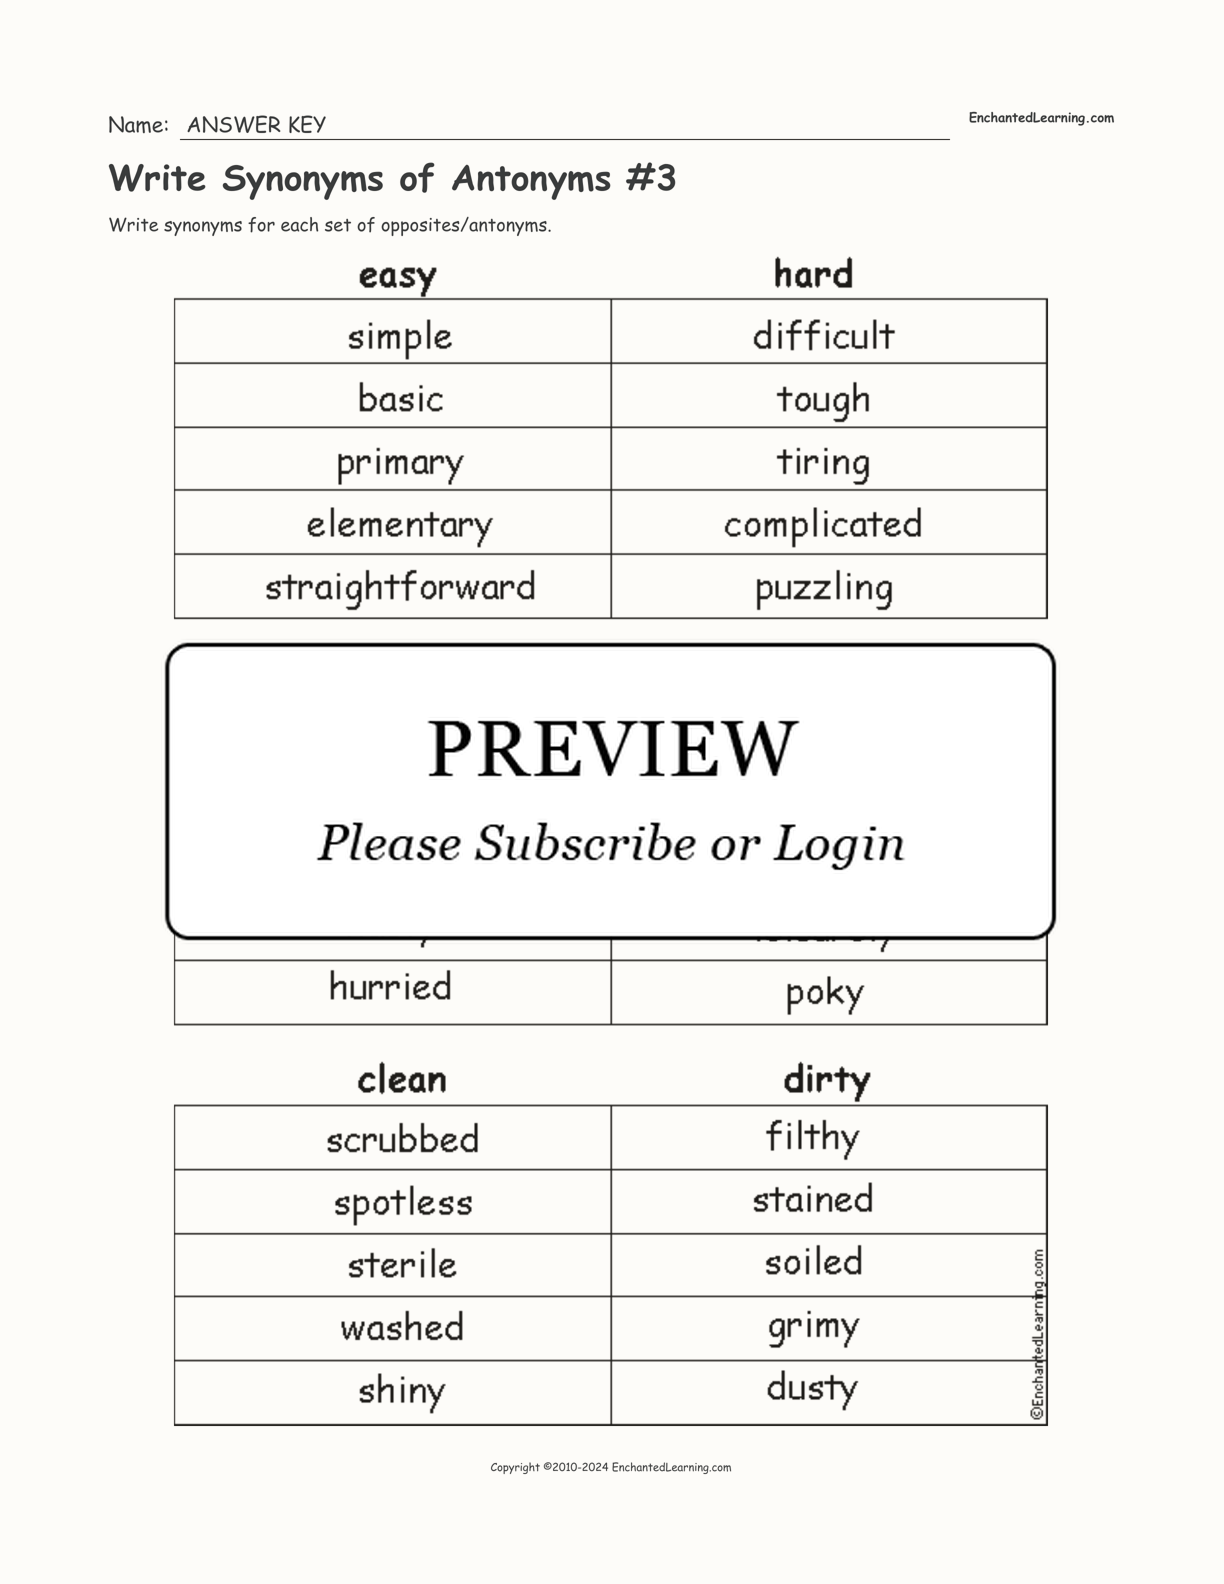 Write Synonyms of Antonyms #3 interactive worksheet page 2